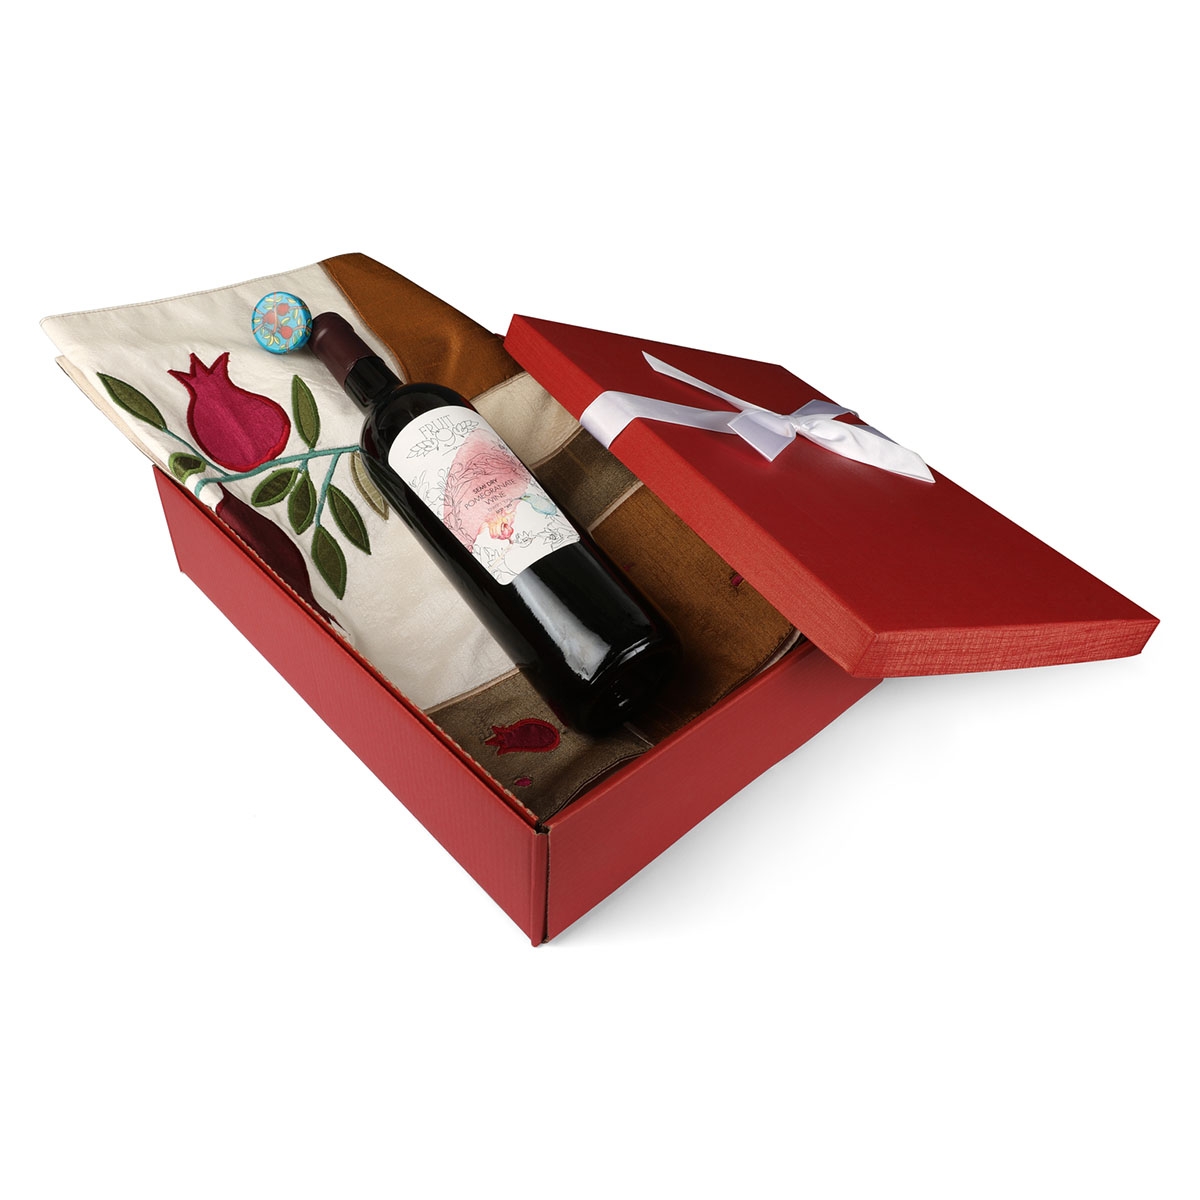 Exclusive Land of Israel Gift Box - 1